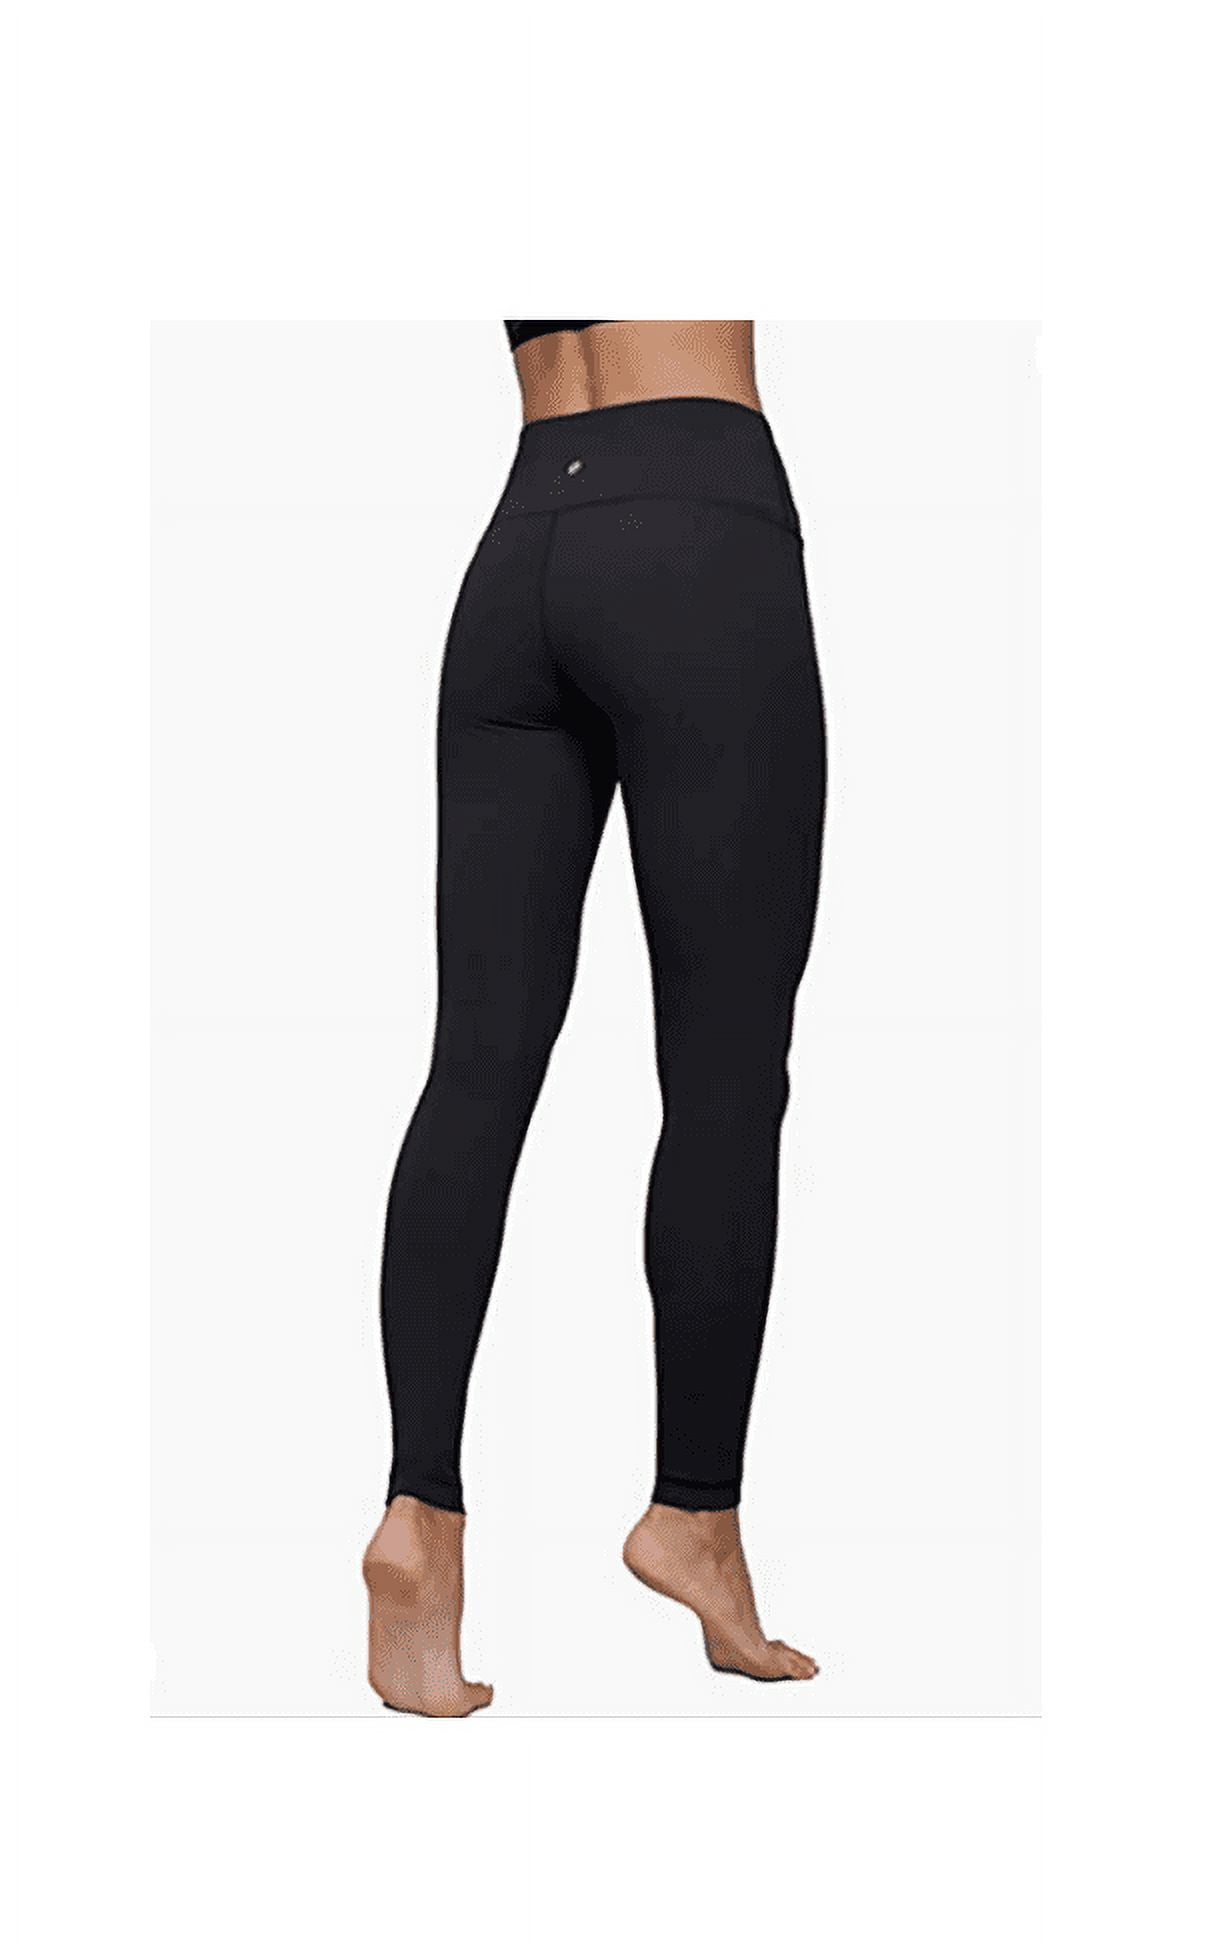 Tuff Athletics Women's High Waisted Legging with Pockets, Black, Medium :  Buy Online at Best Price in KSA - Souq is now : Fashion